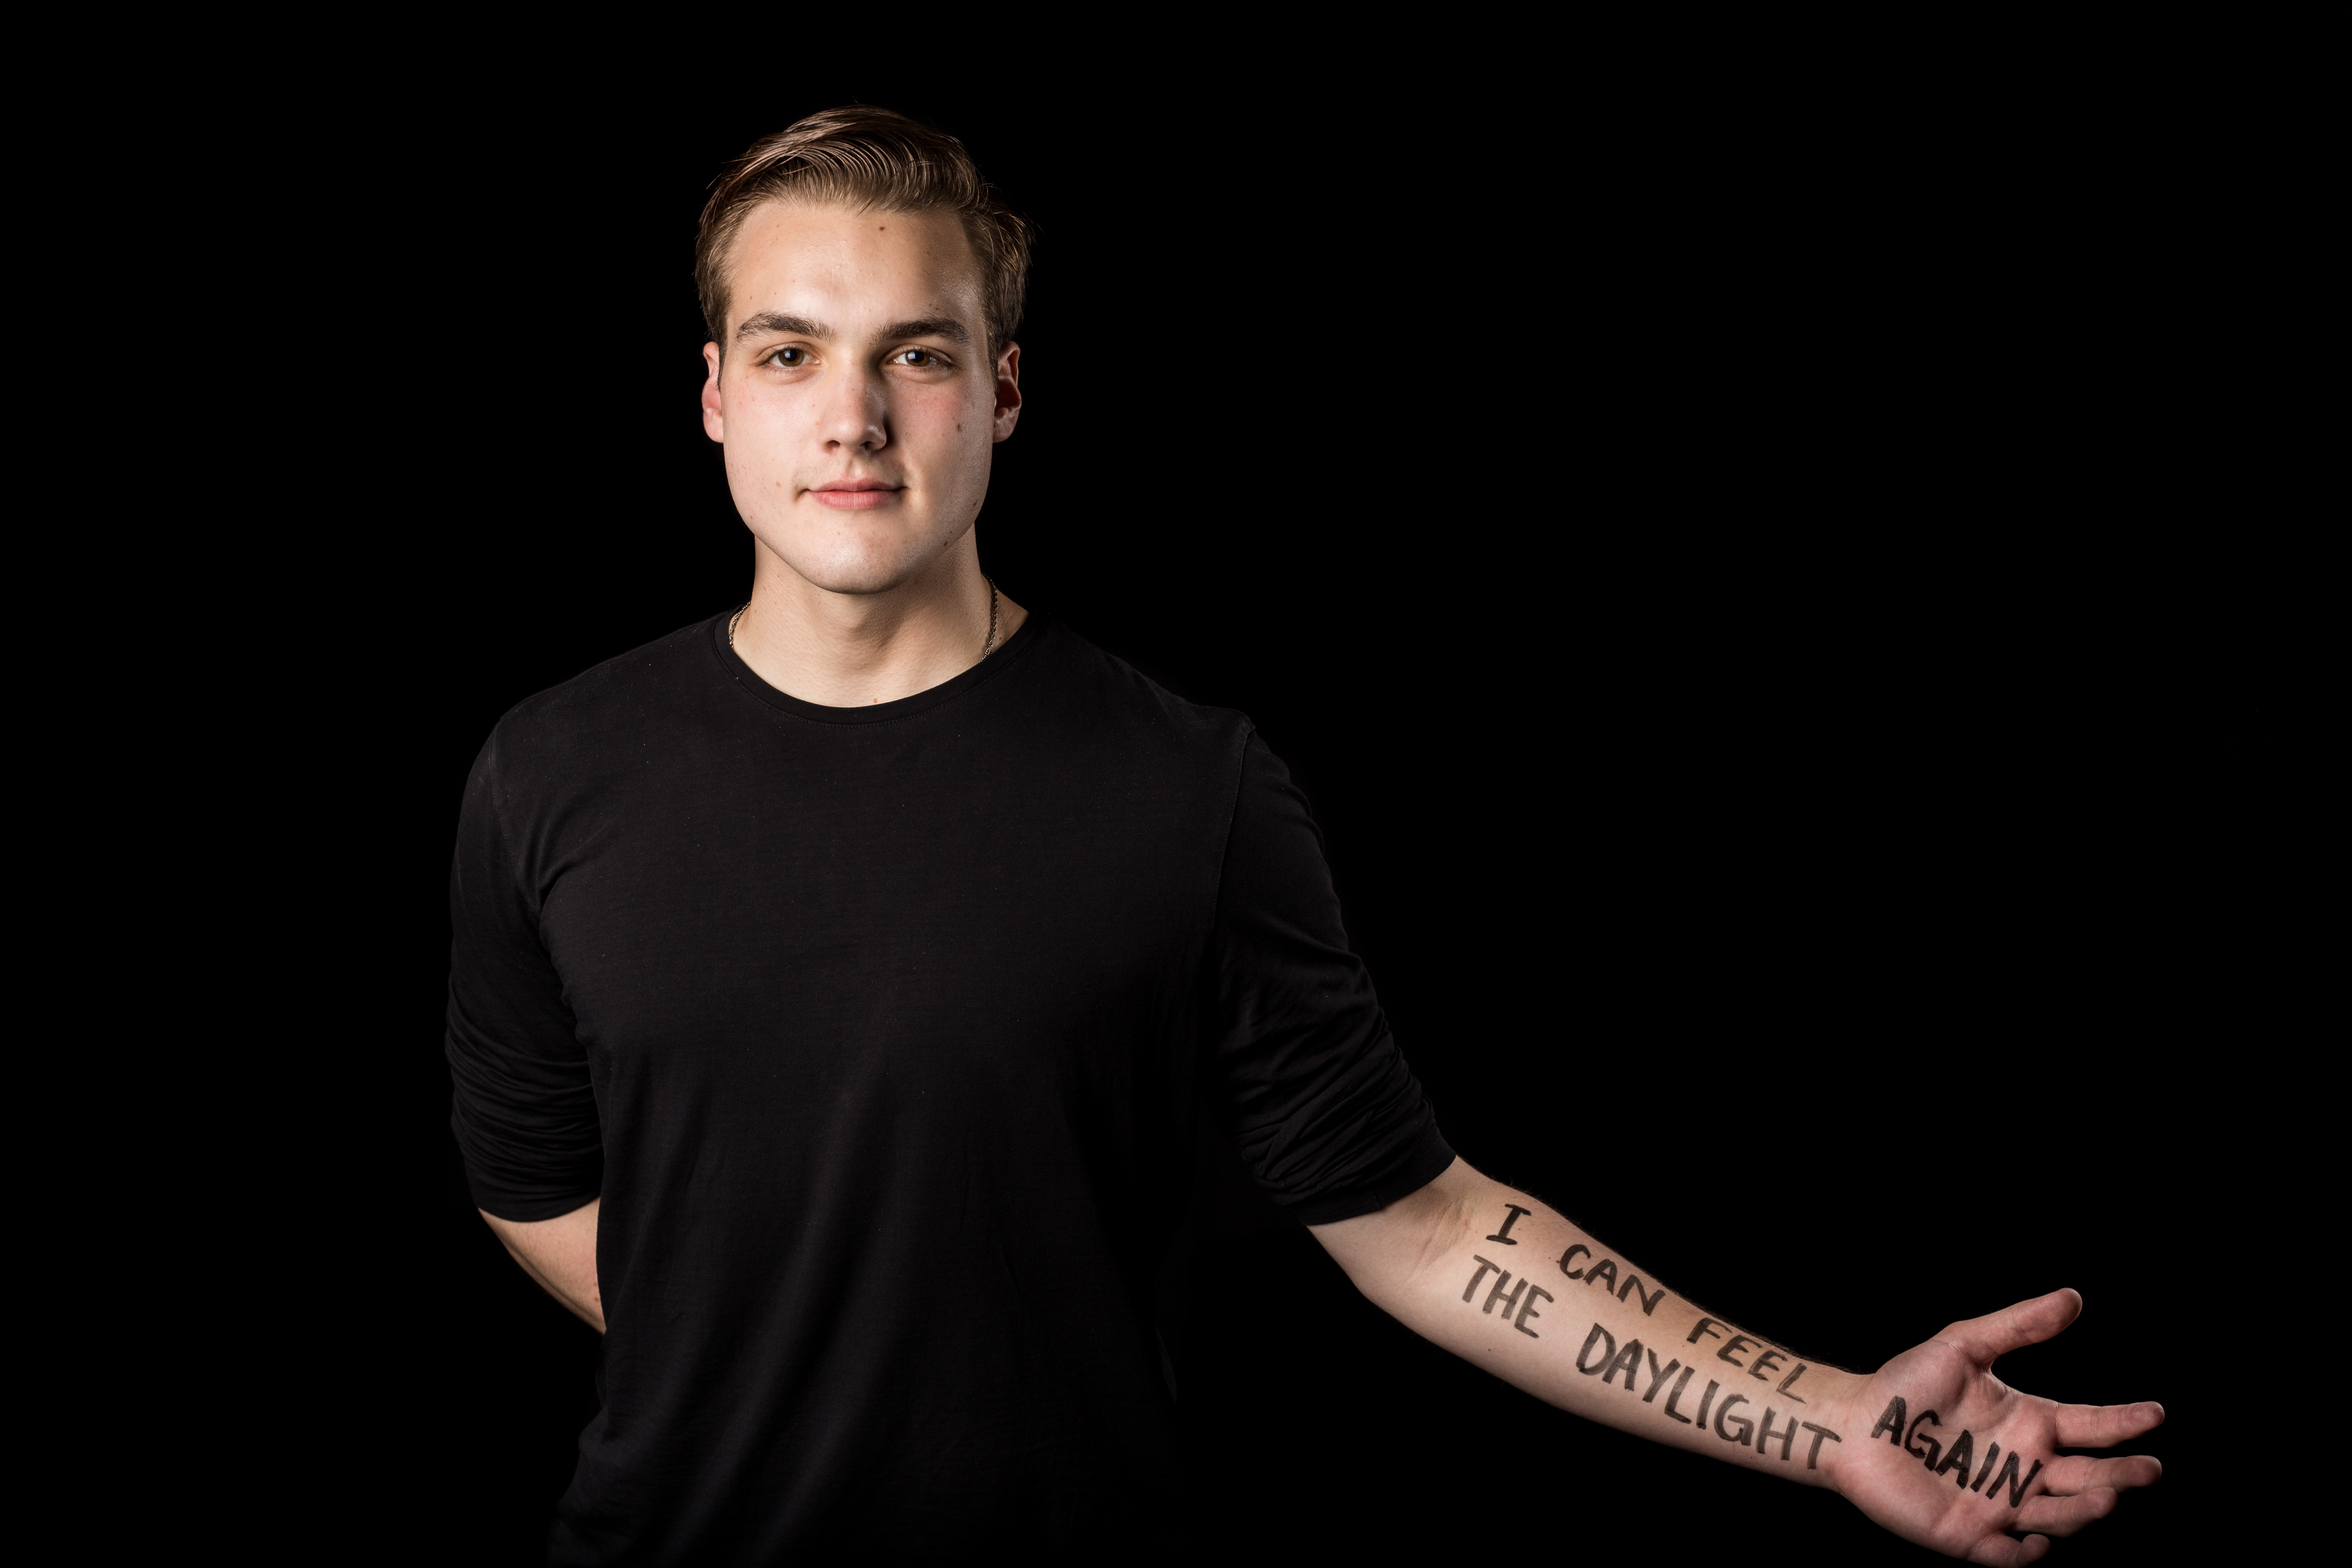 photo of contributor's son holding arm out with words "I can see the daylight again" written on skin in marker pen